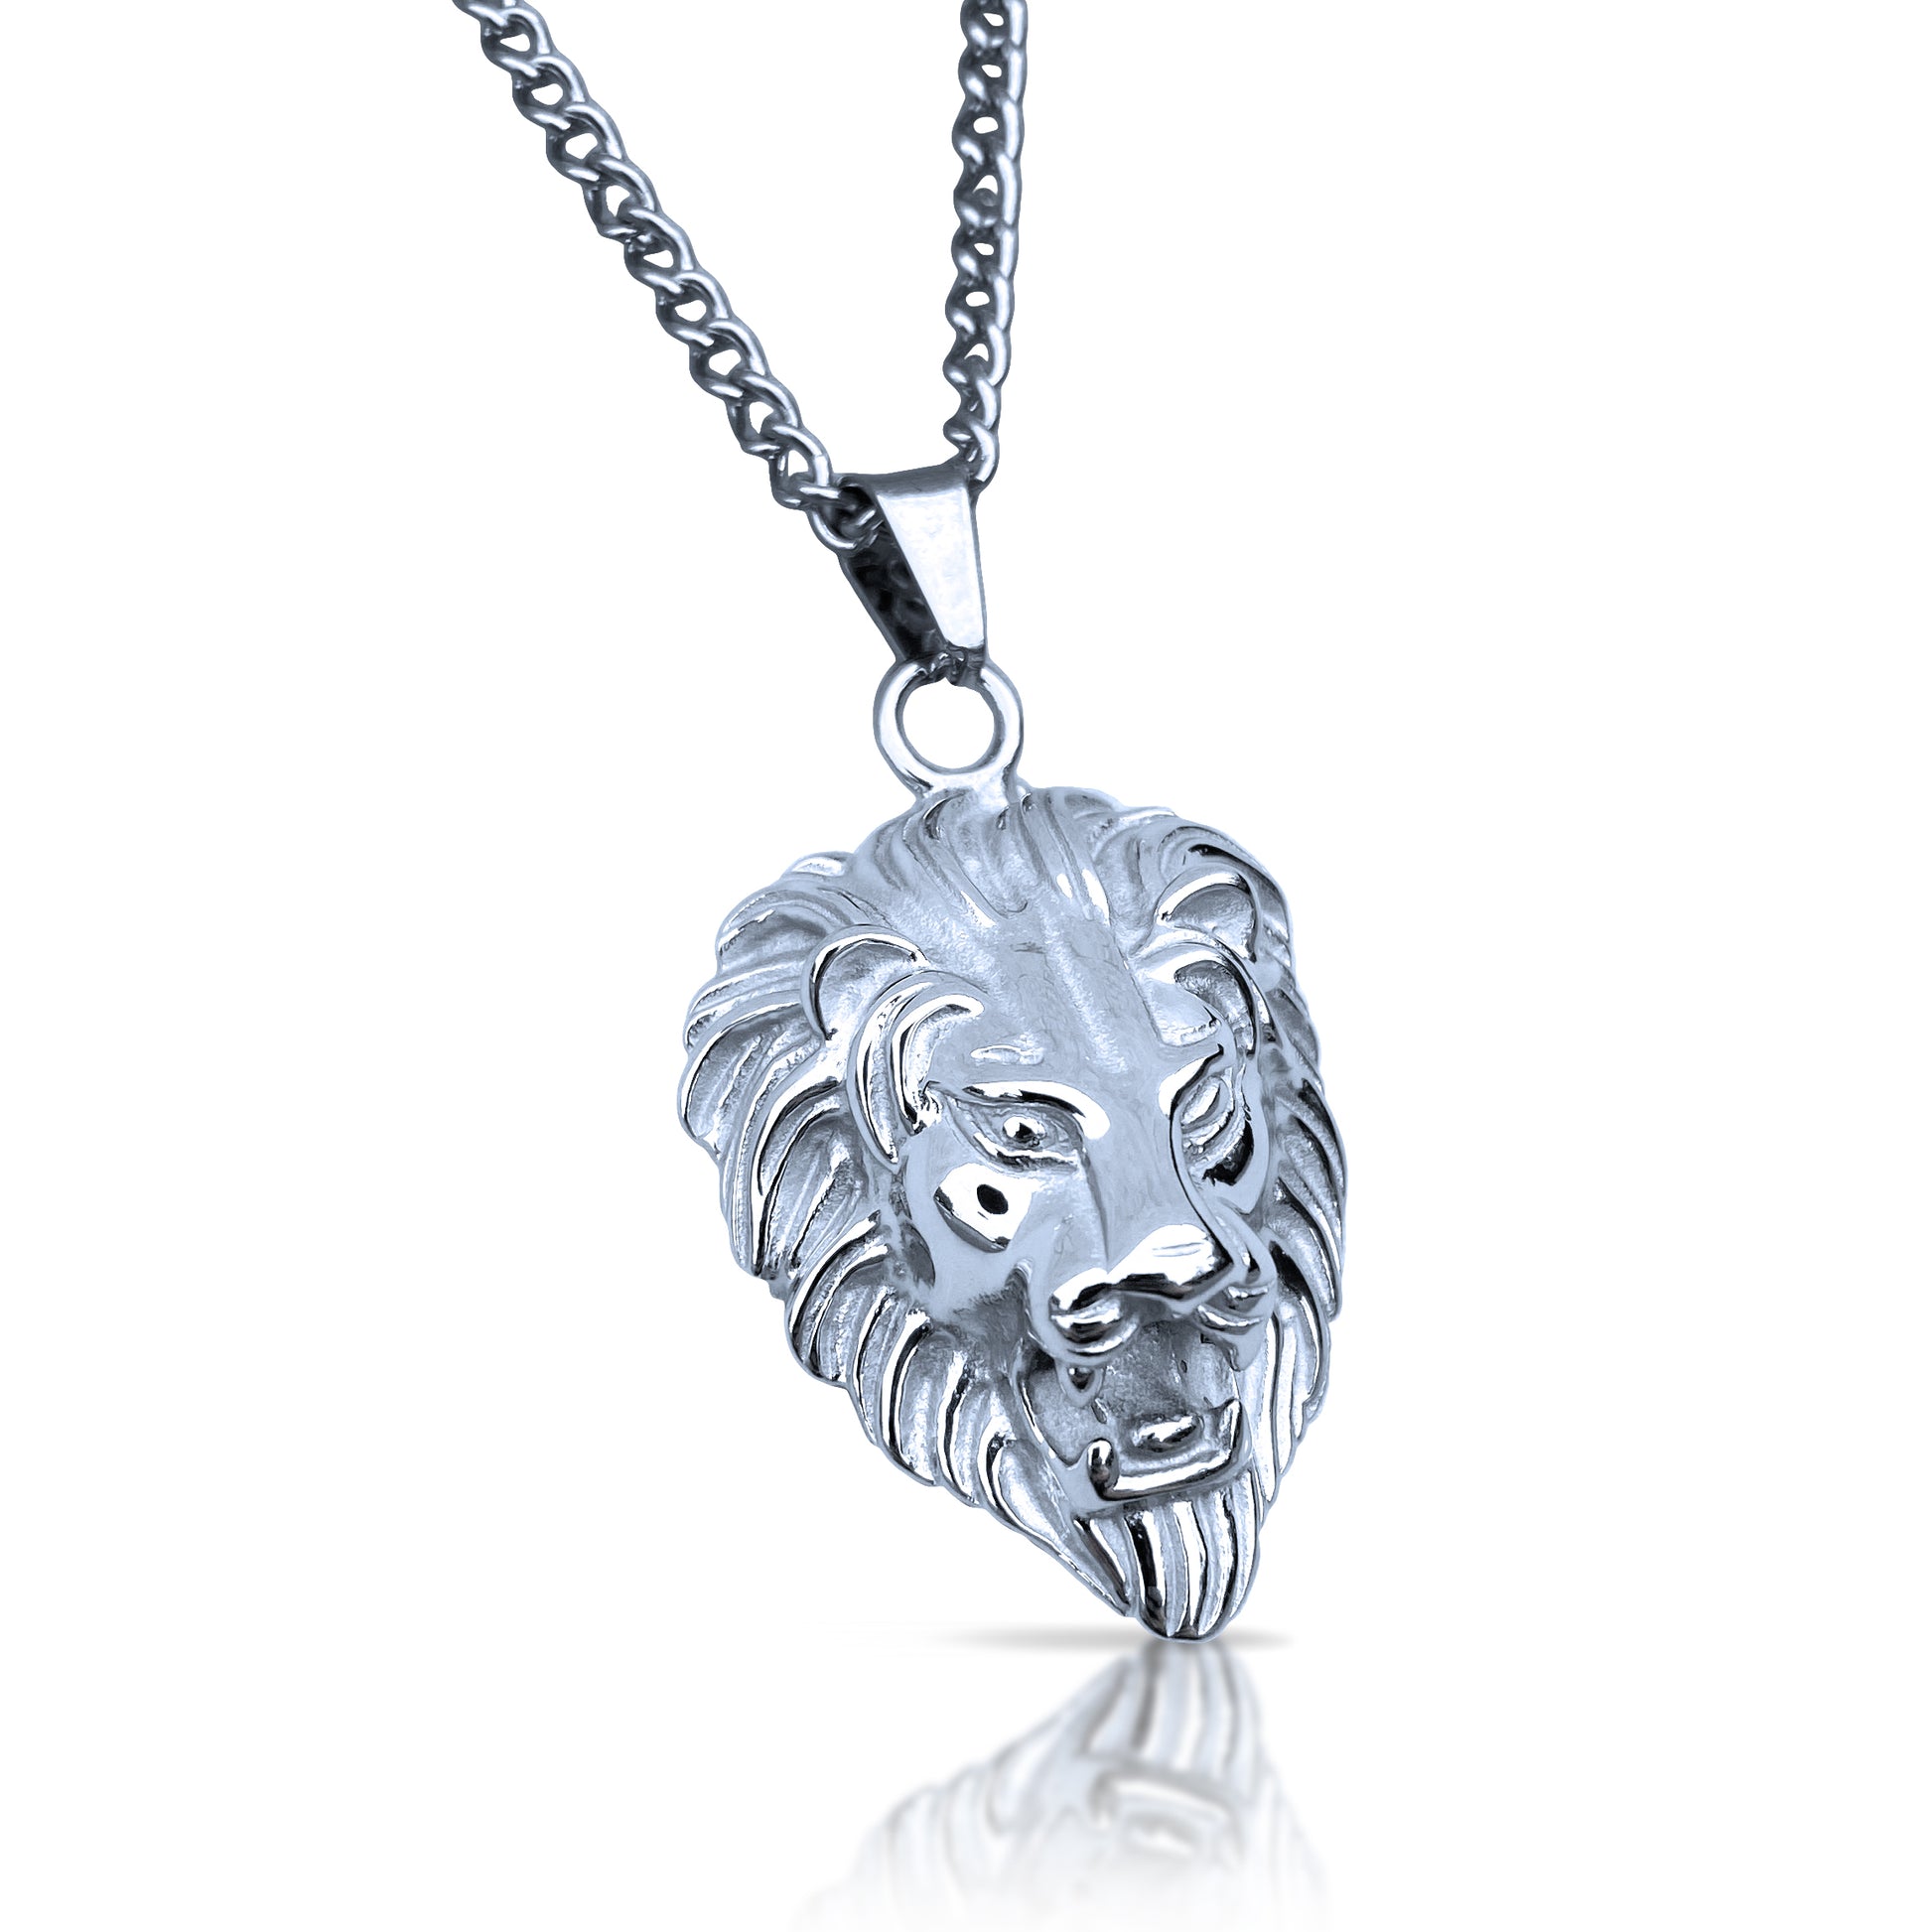 Lion Pendant With Chain Necklace - Stainless Steel